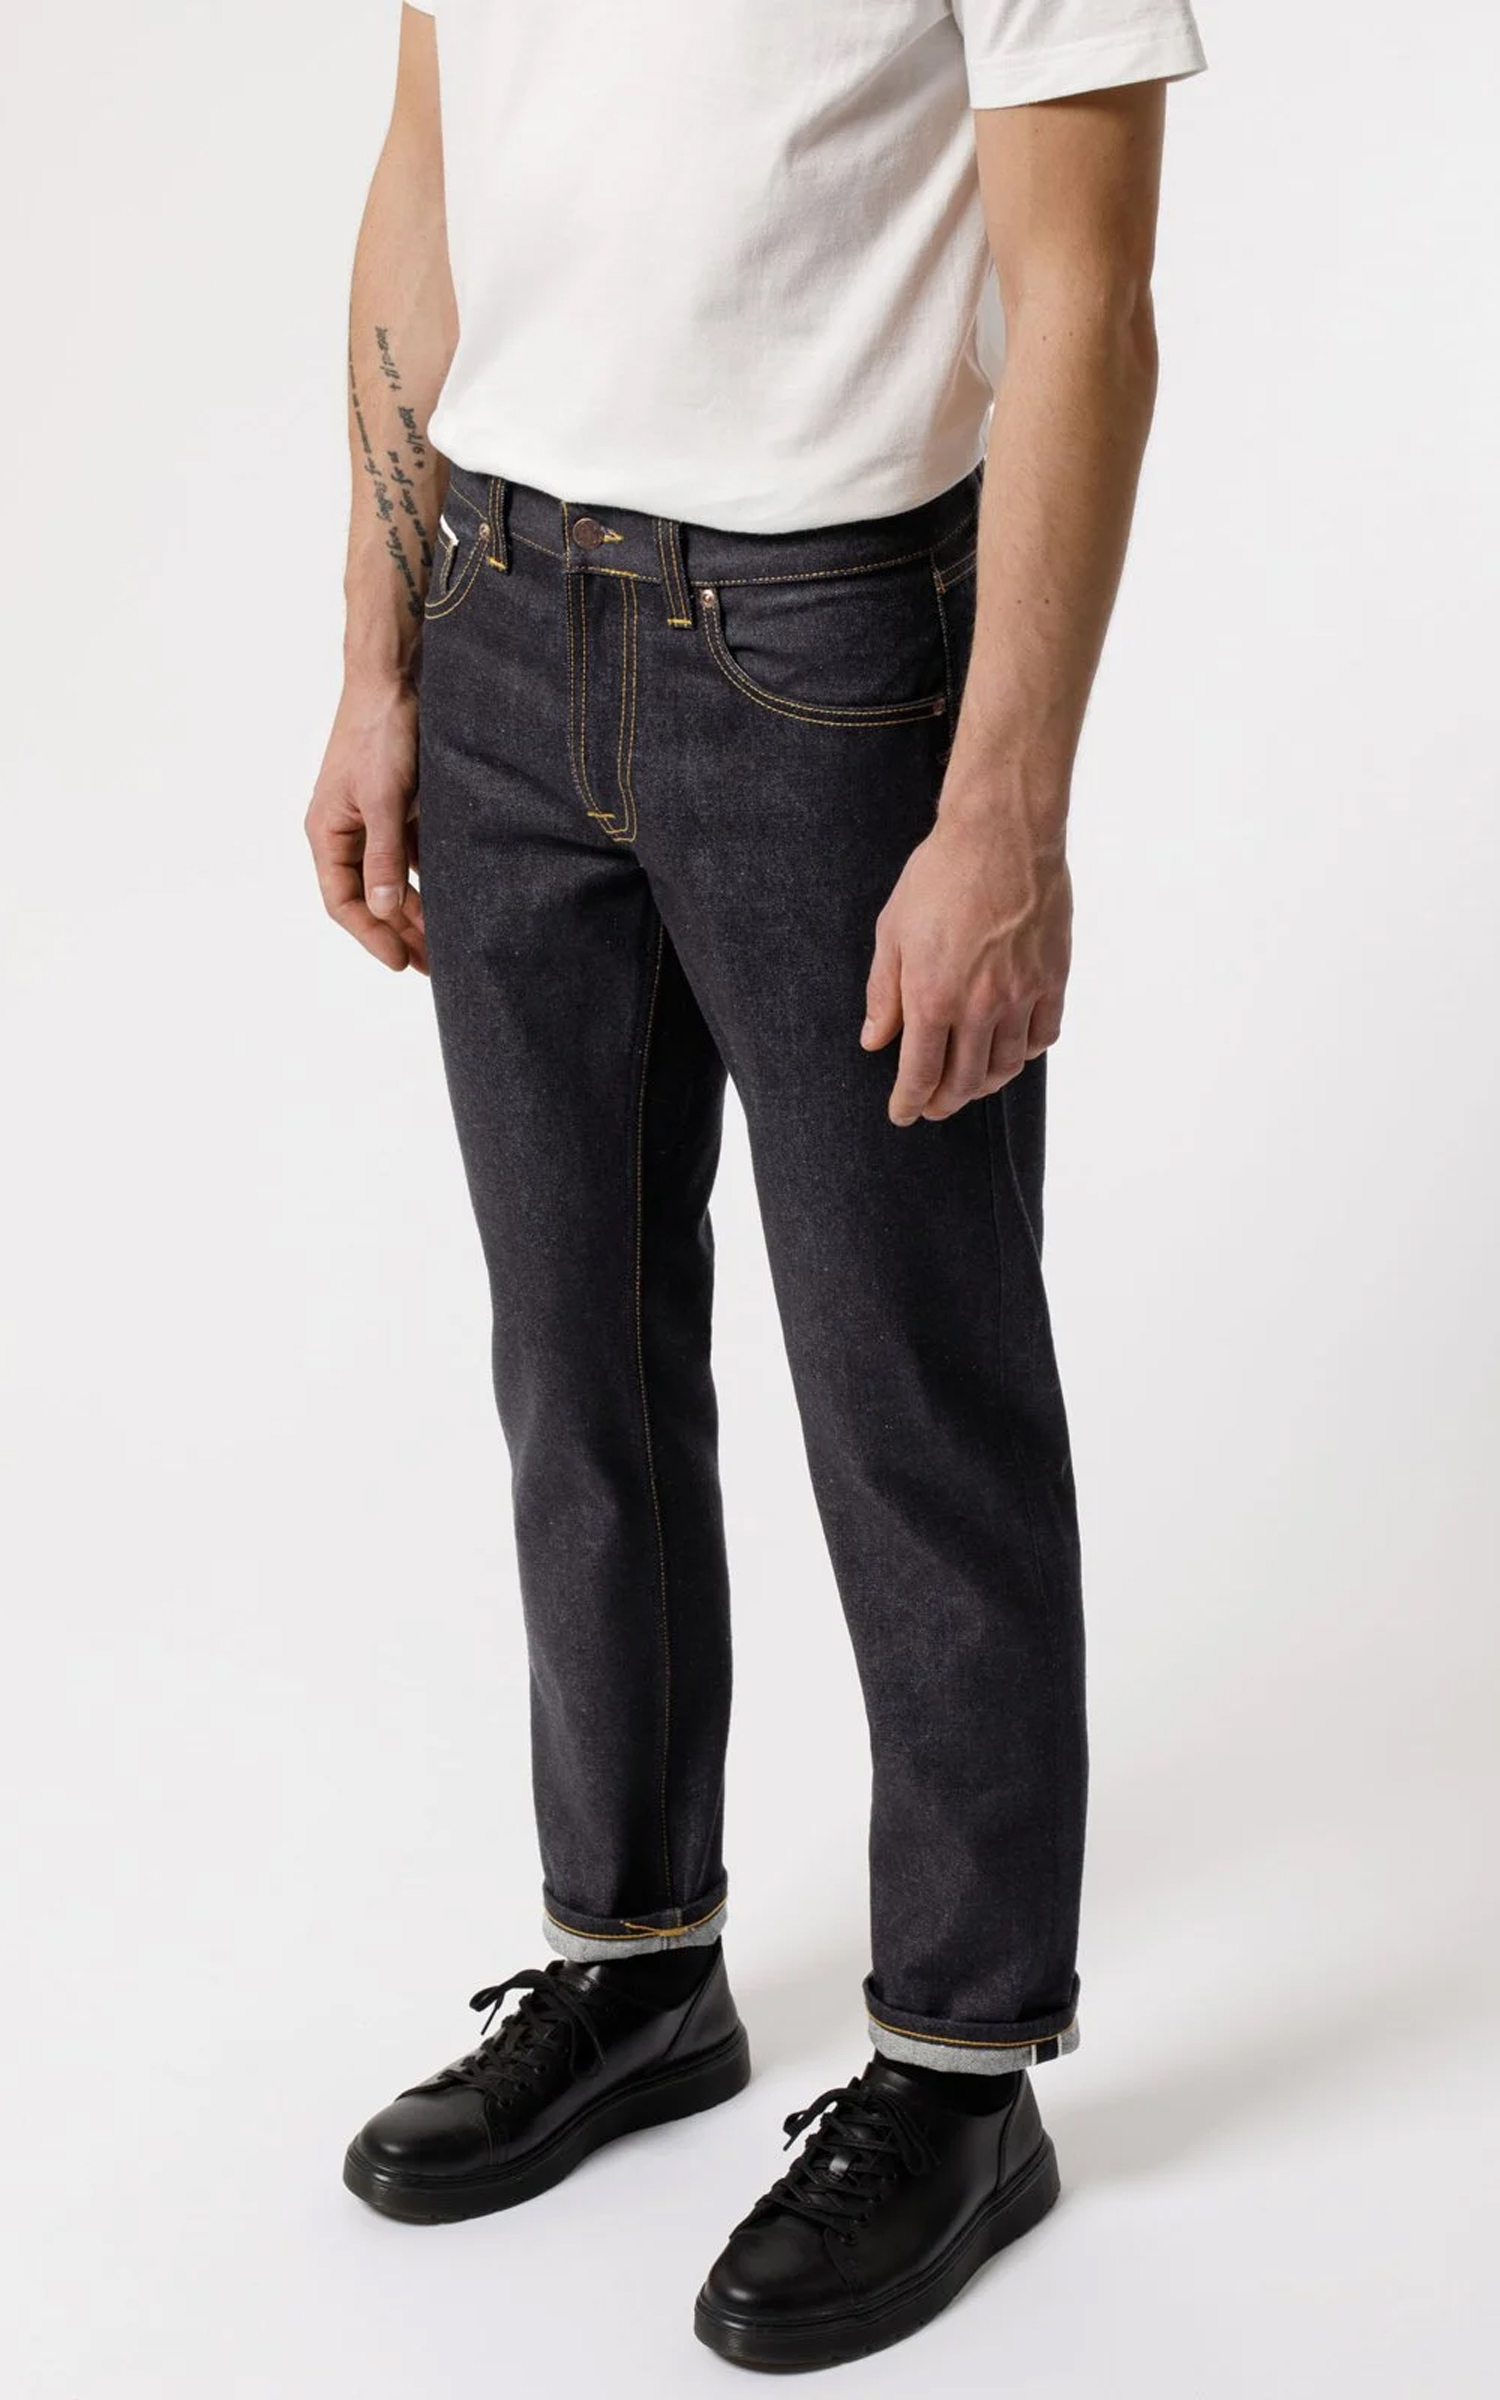 Nudie Jeans Gritty Jackson Dry Maze Selvage | Cultizm